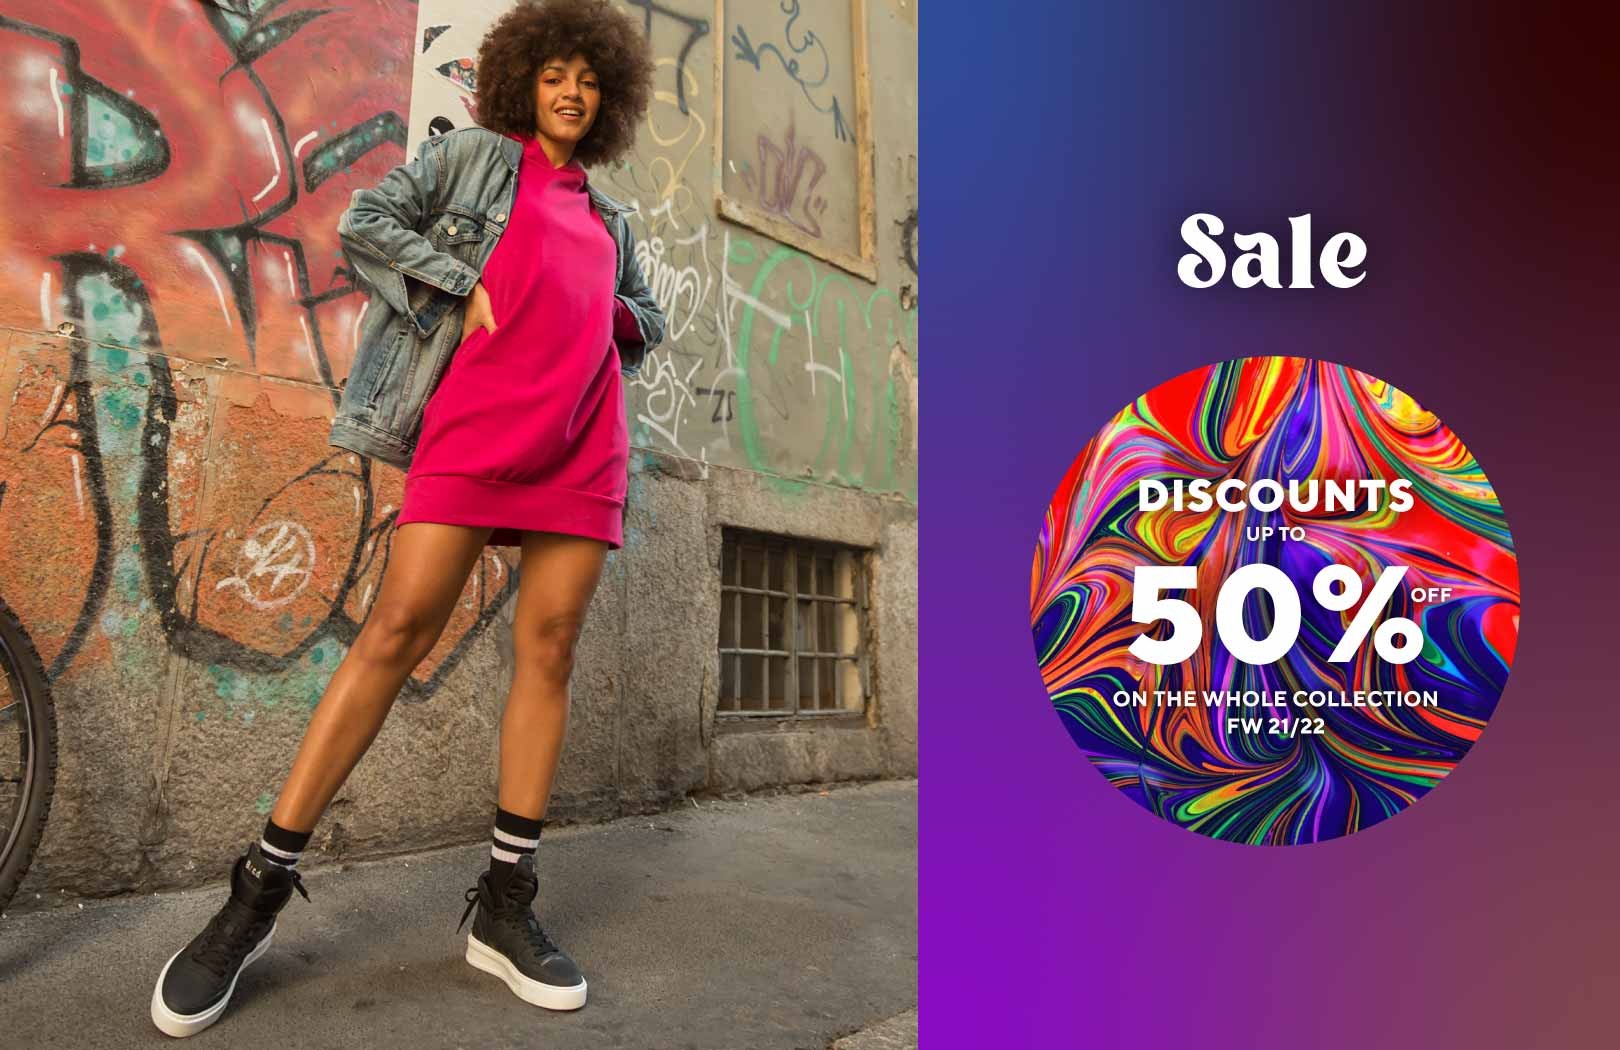 SALE!  Discounts up to 50% off